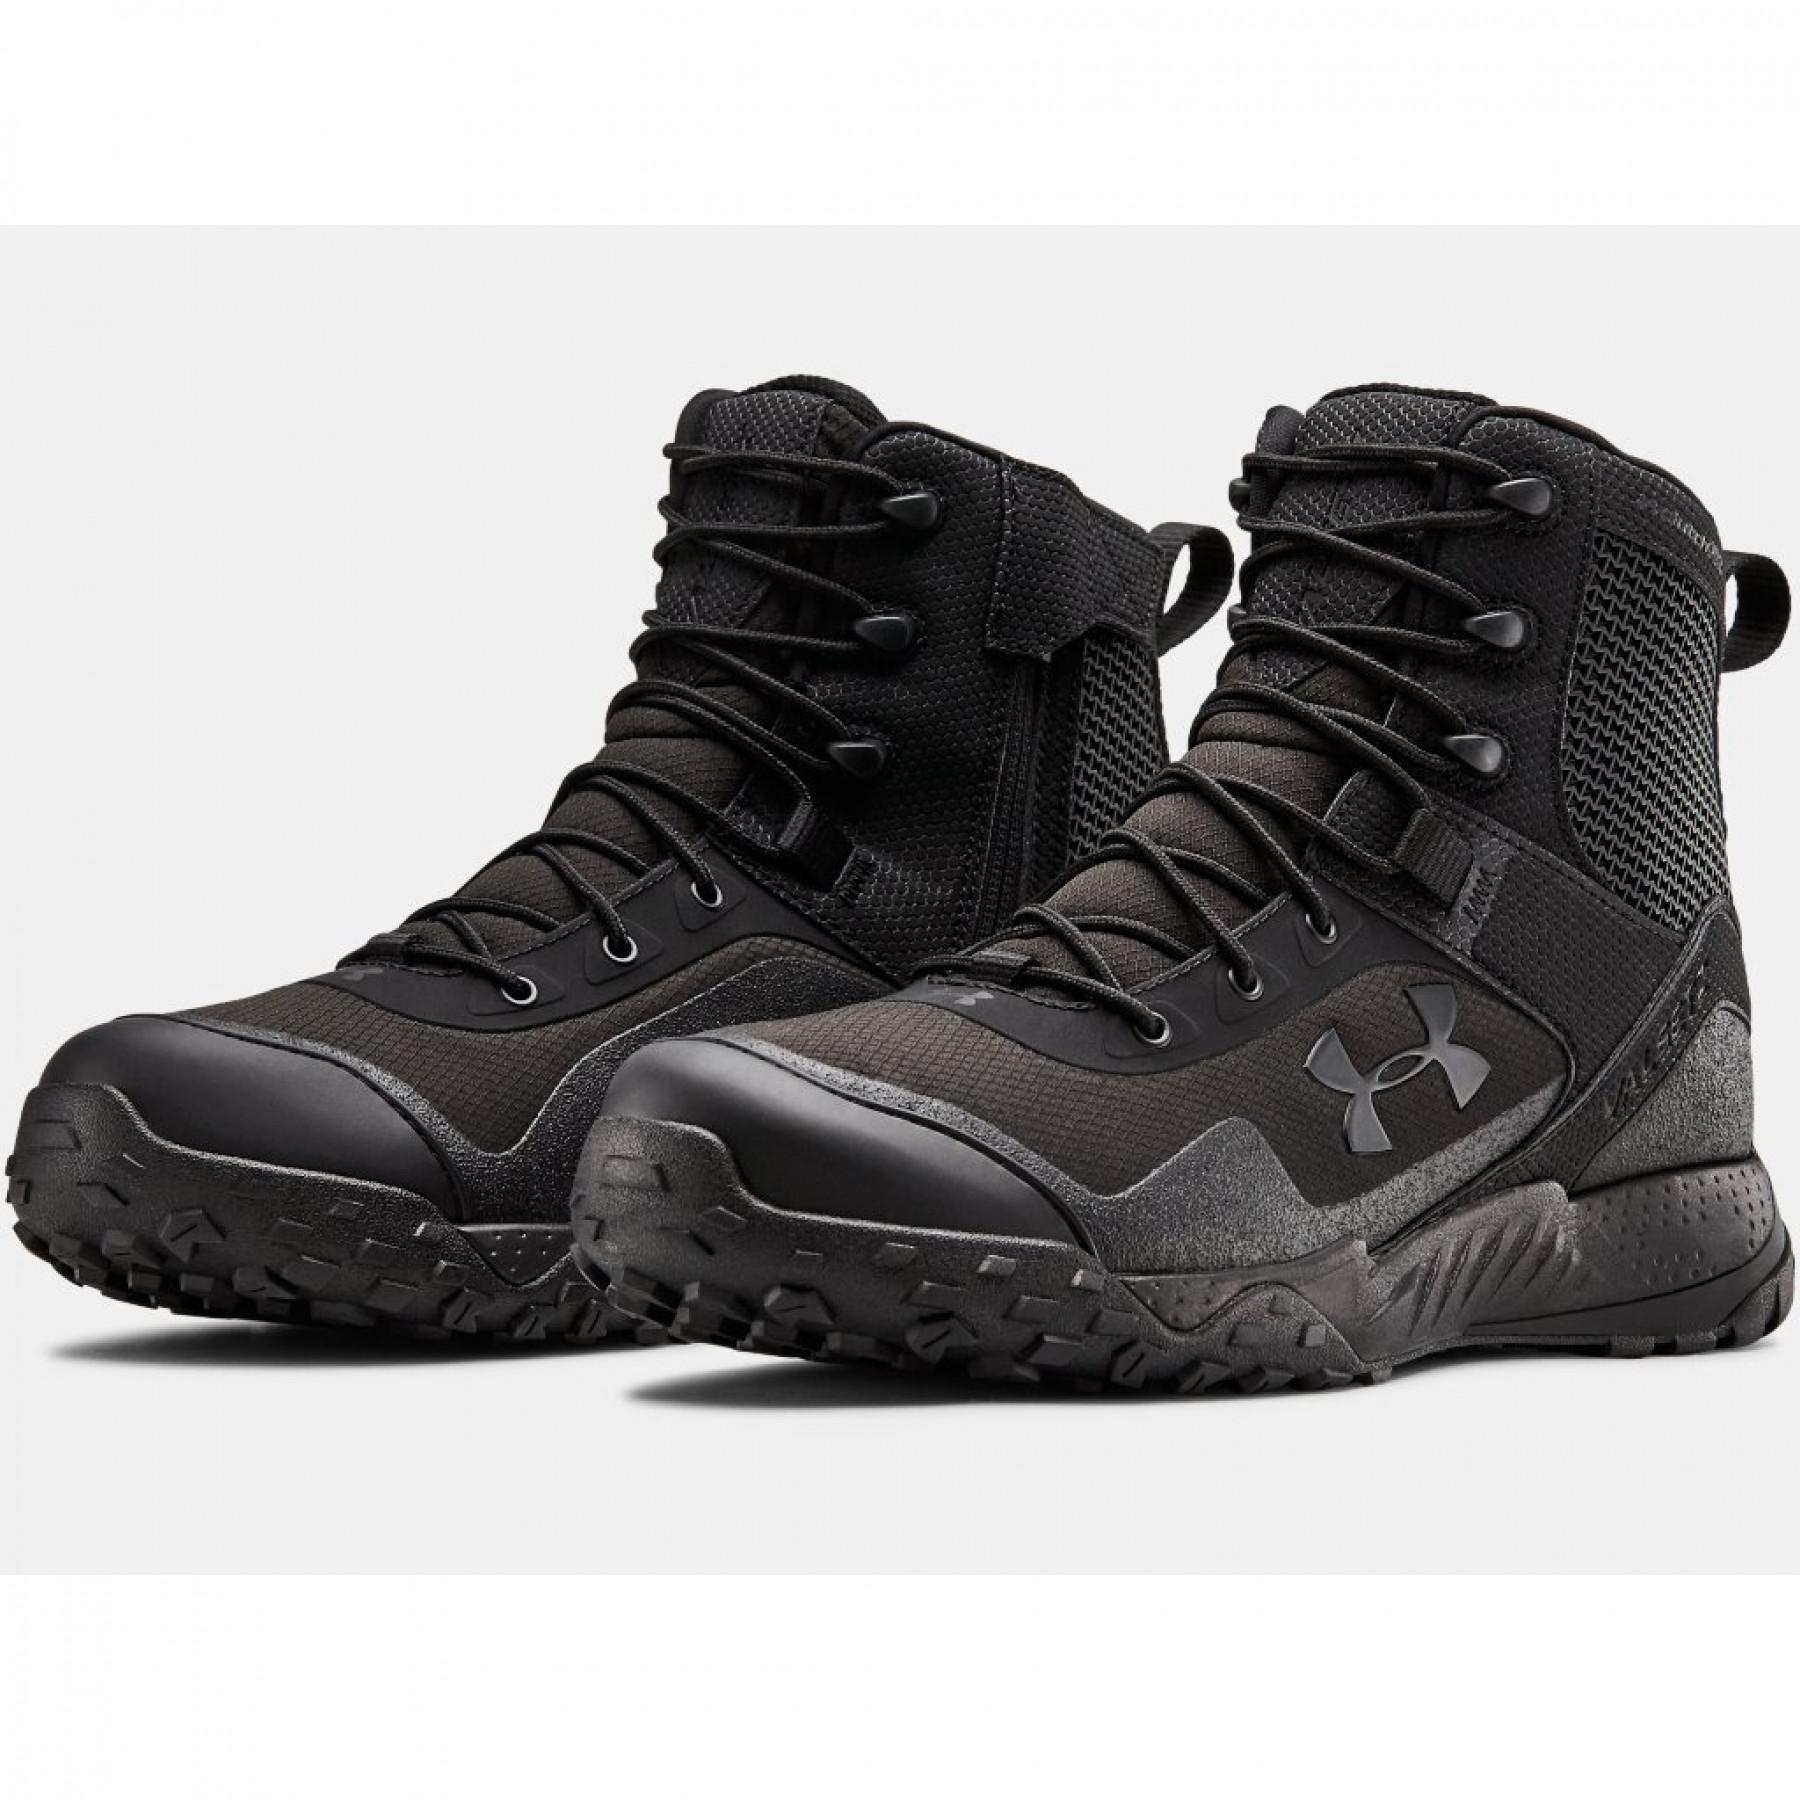 Shoes with side zipper Under Armour Valsetz RTS 1.5